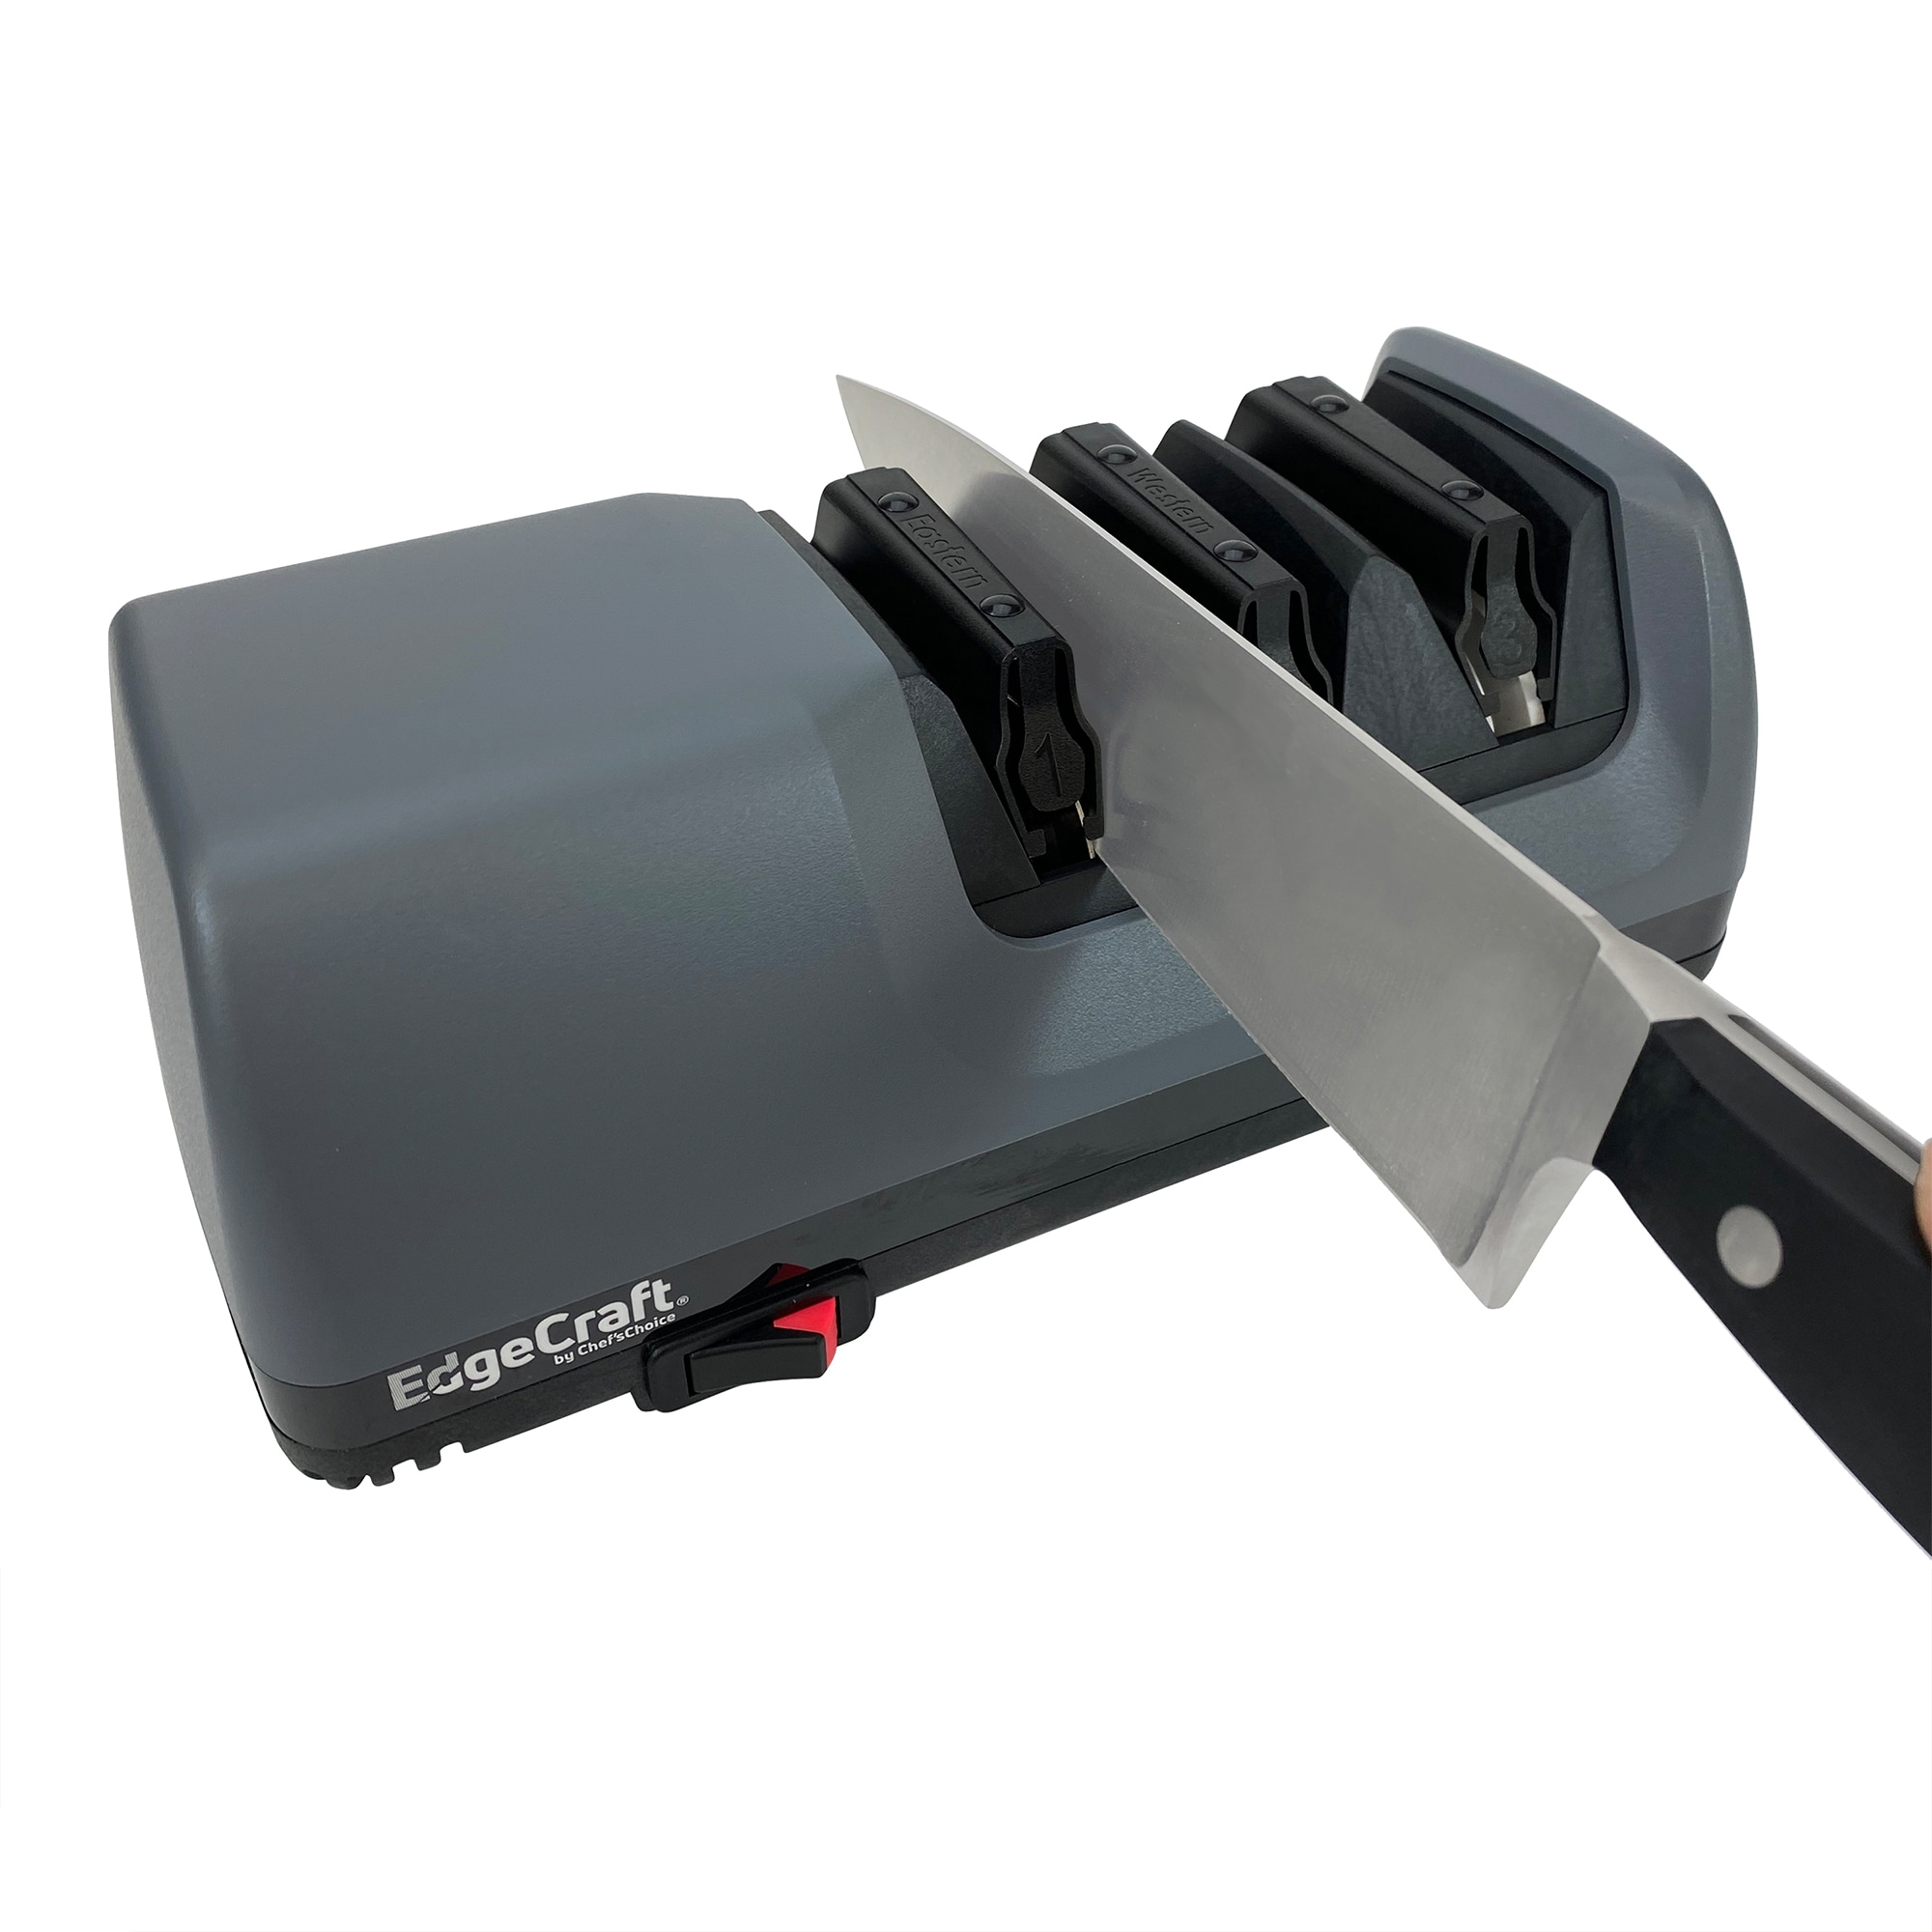 Chef's Choice Model 130 3-Stage Professional Electric Knife Sharpener, -  Chef's Choice by EdgeCraft